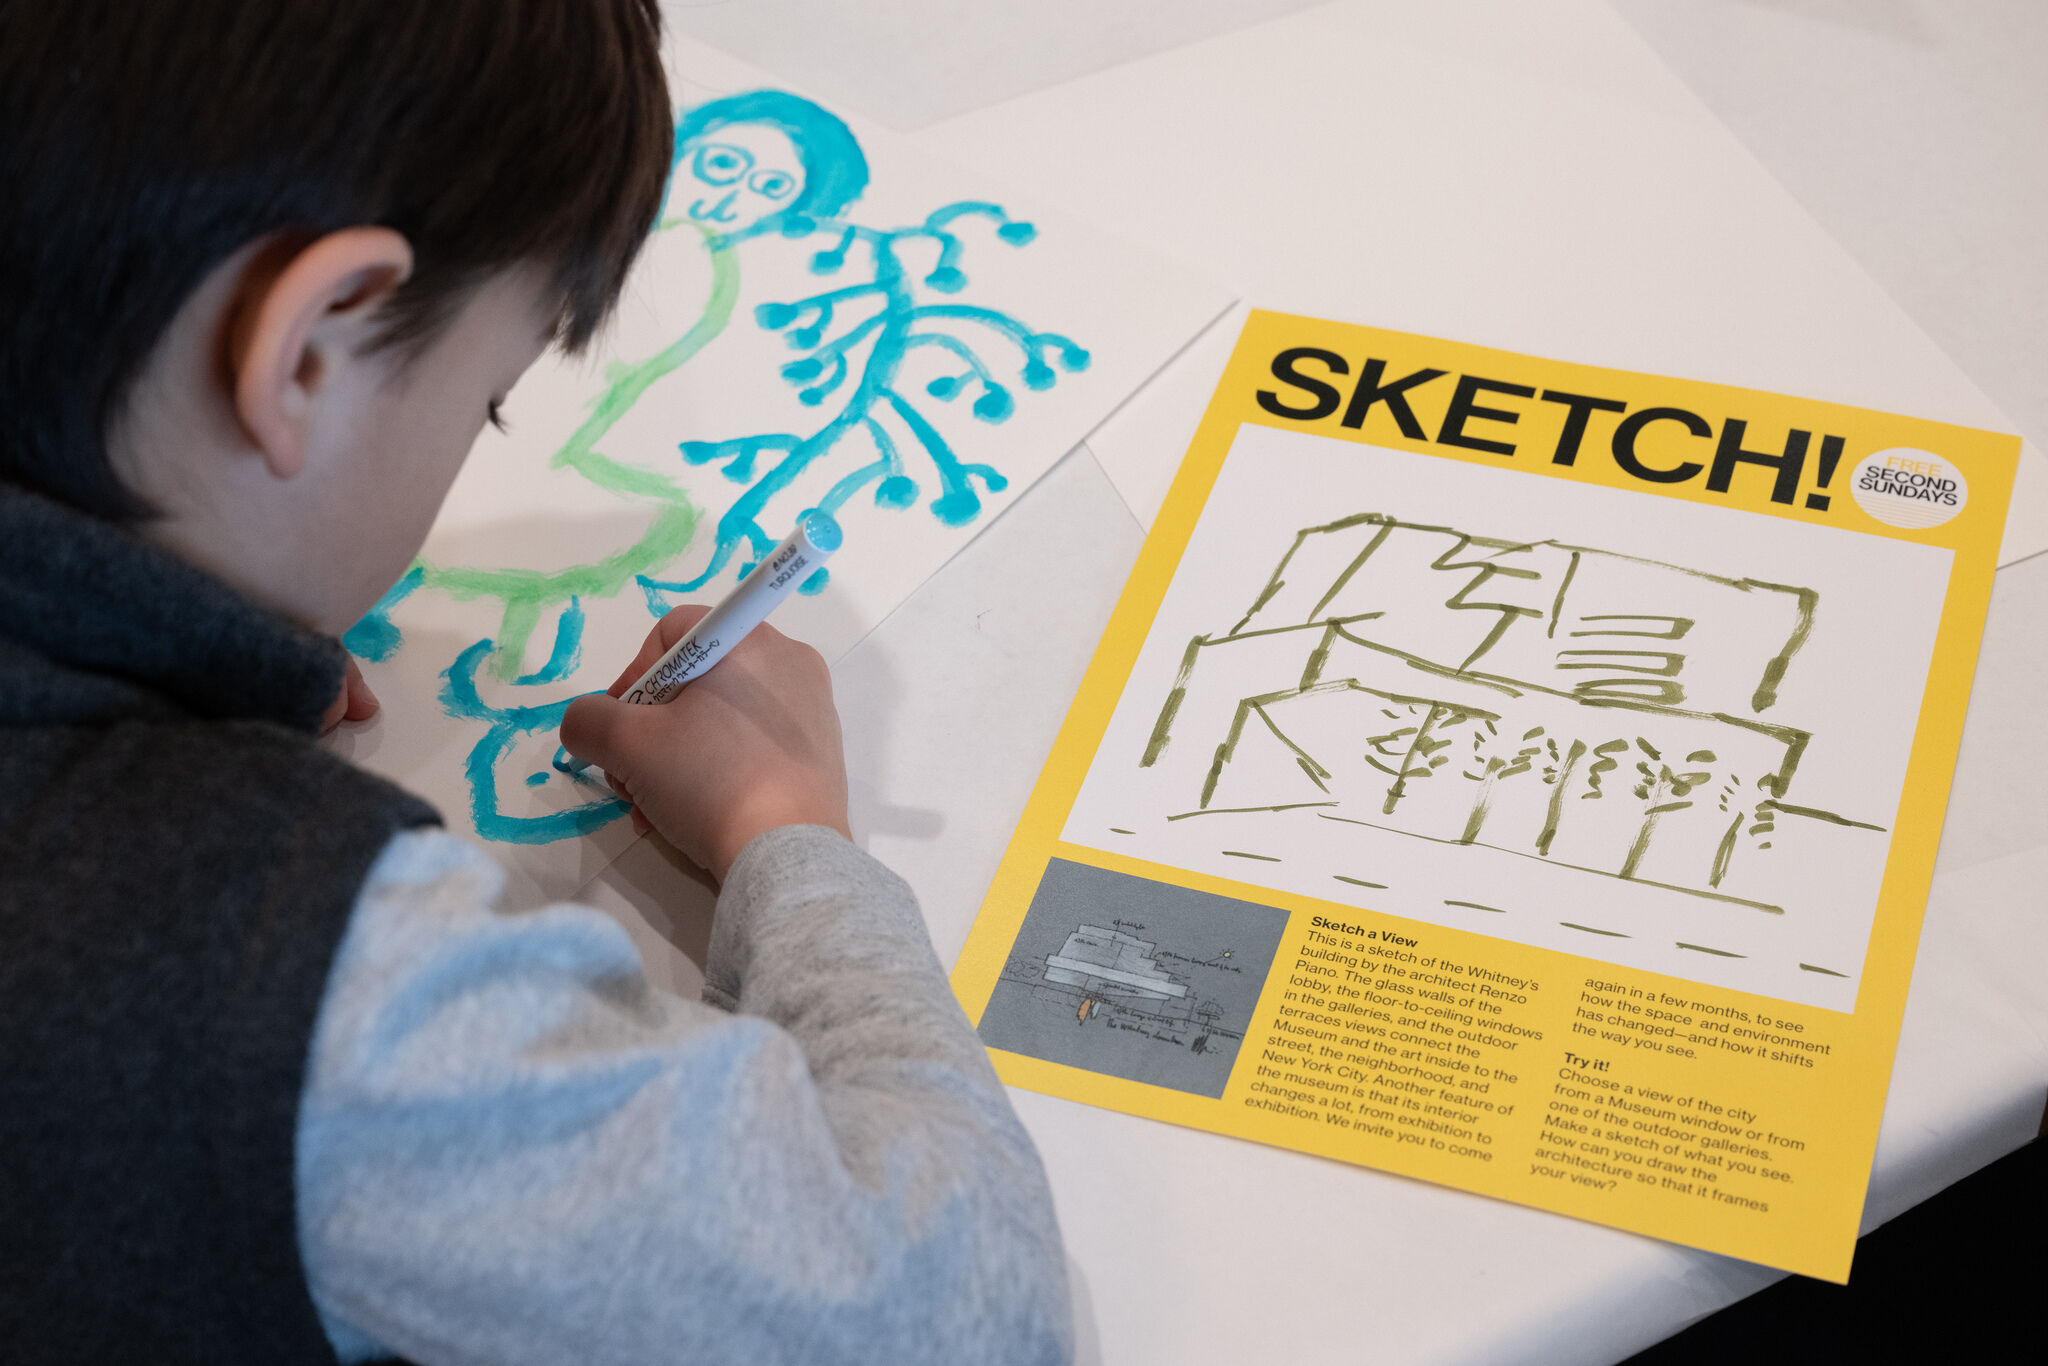 A child draws on paper next to a "SKETCH" instruction sheet, part of an educational activity.